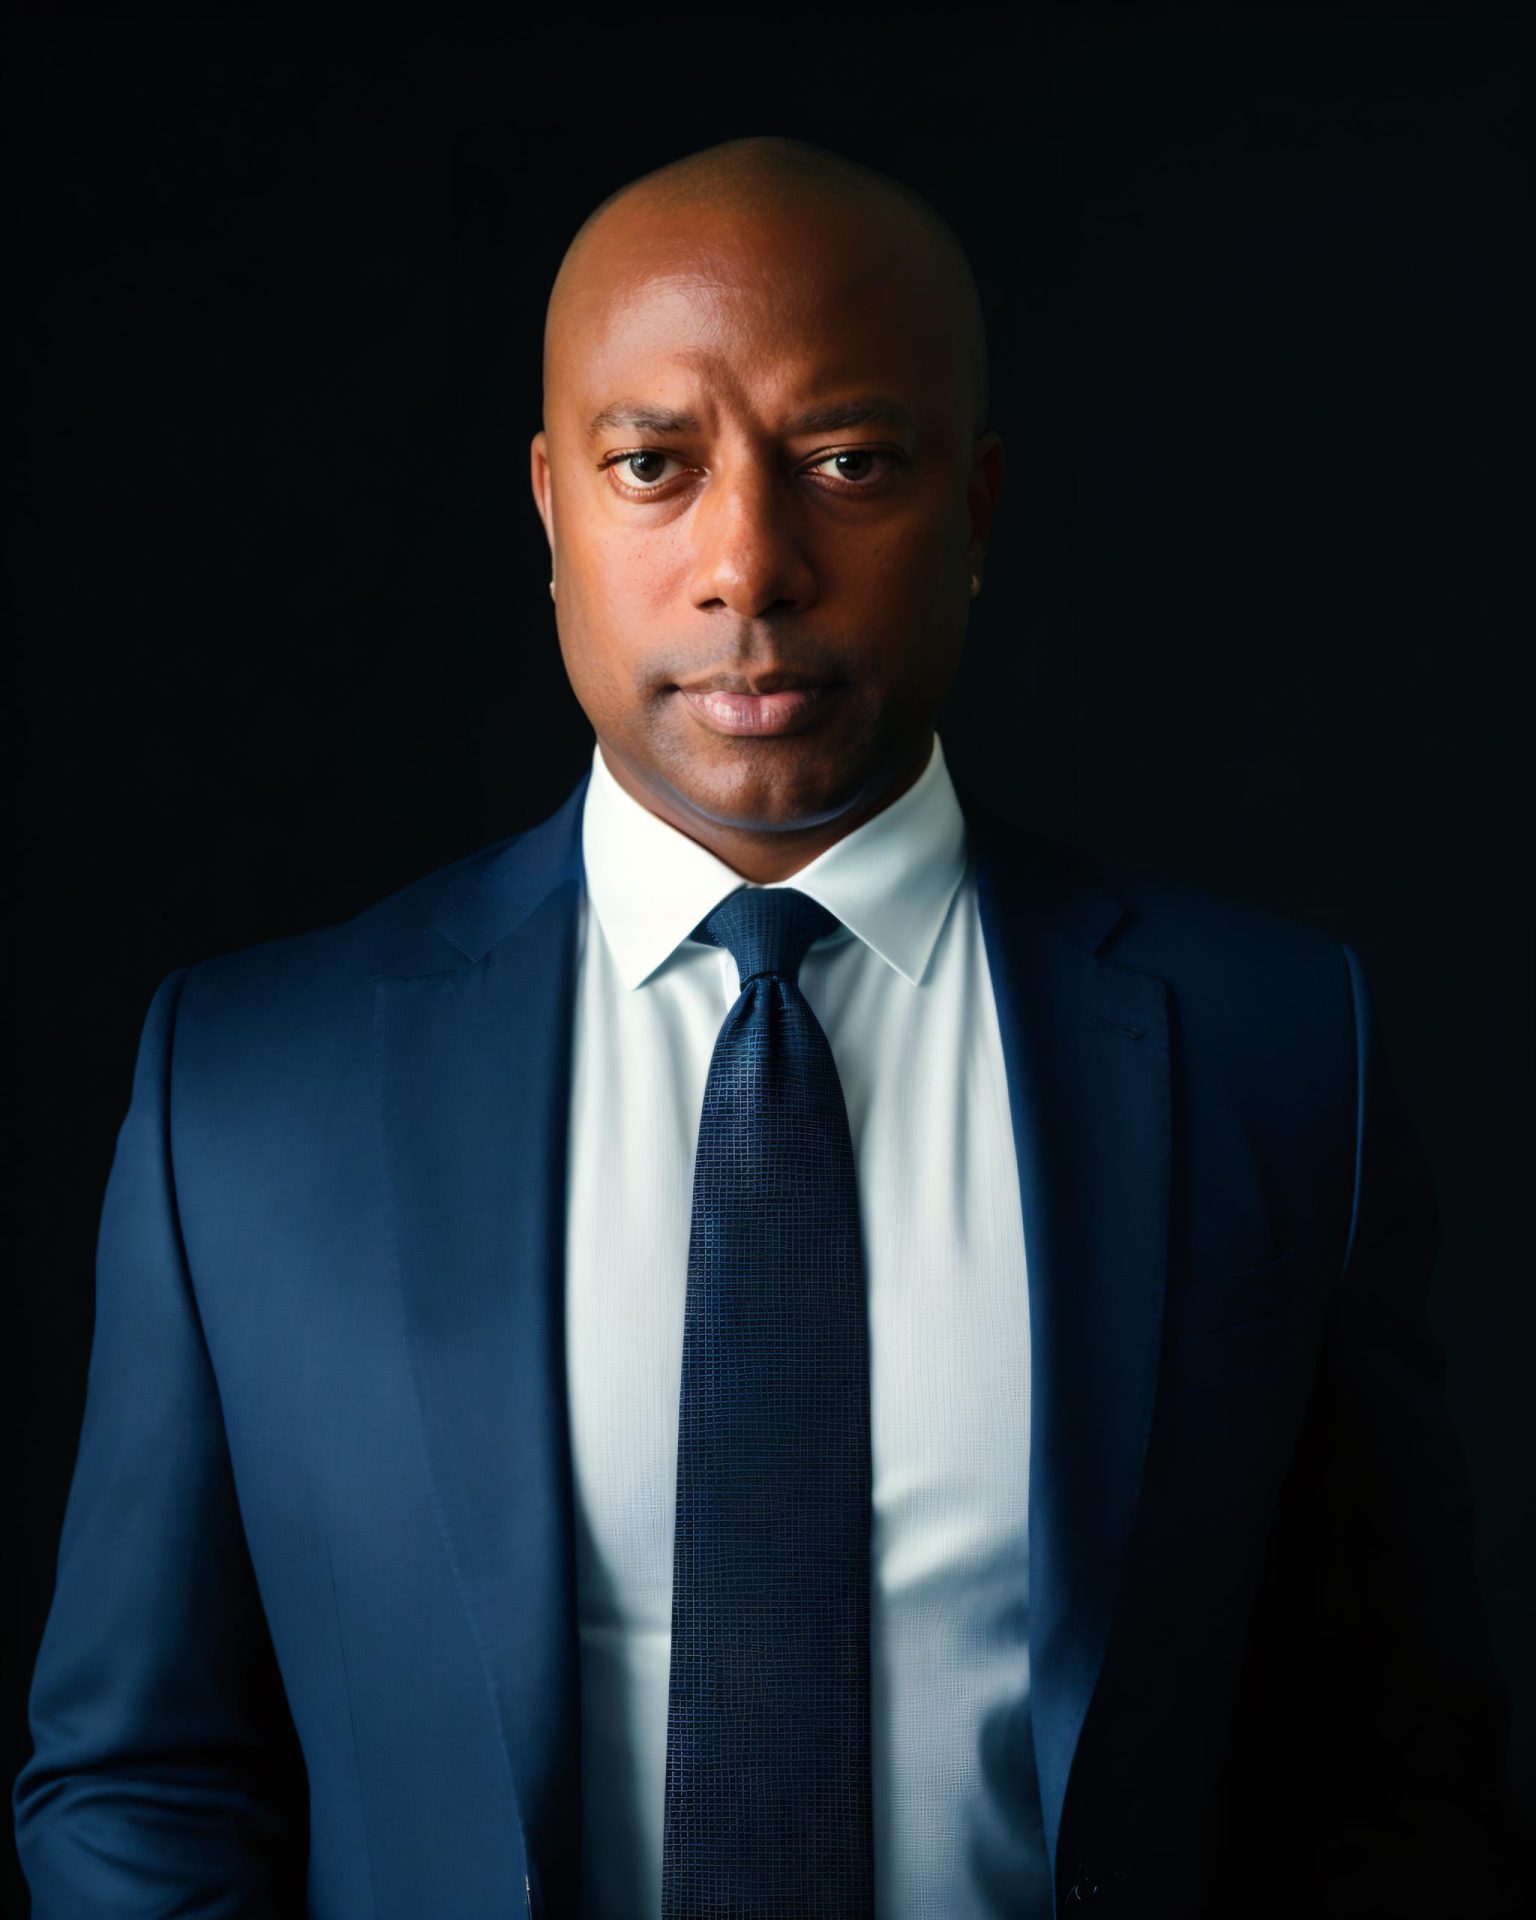 A black man in a suit and tie, ready for contact.